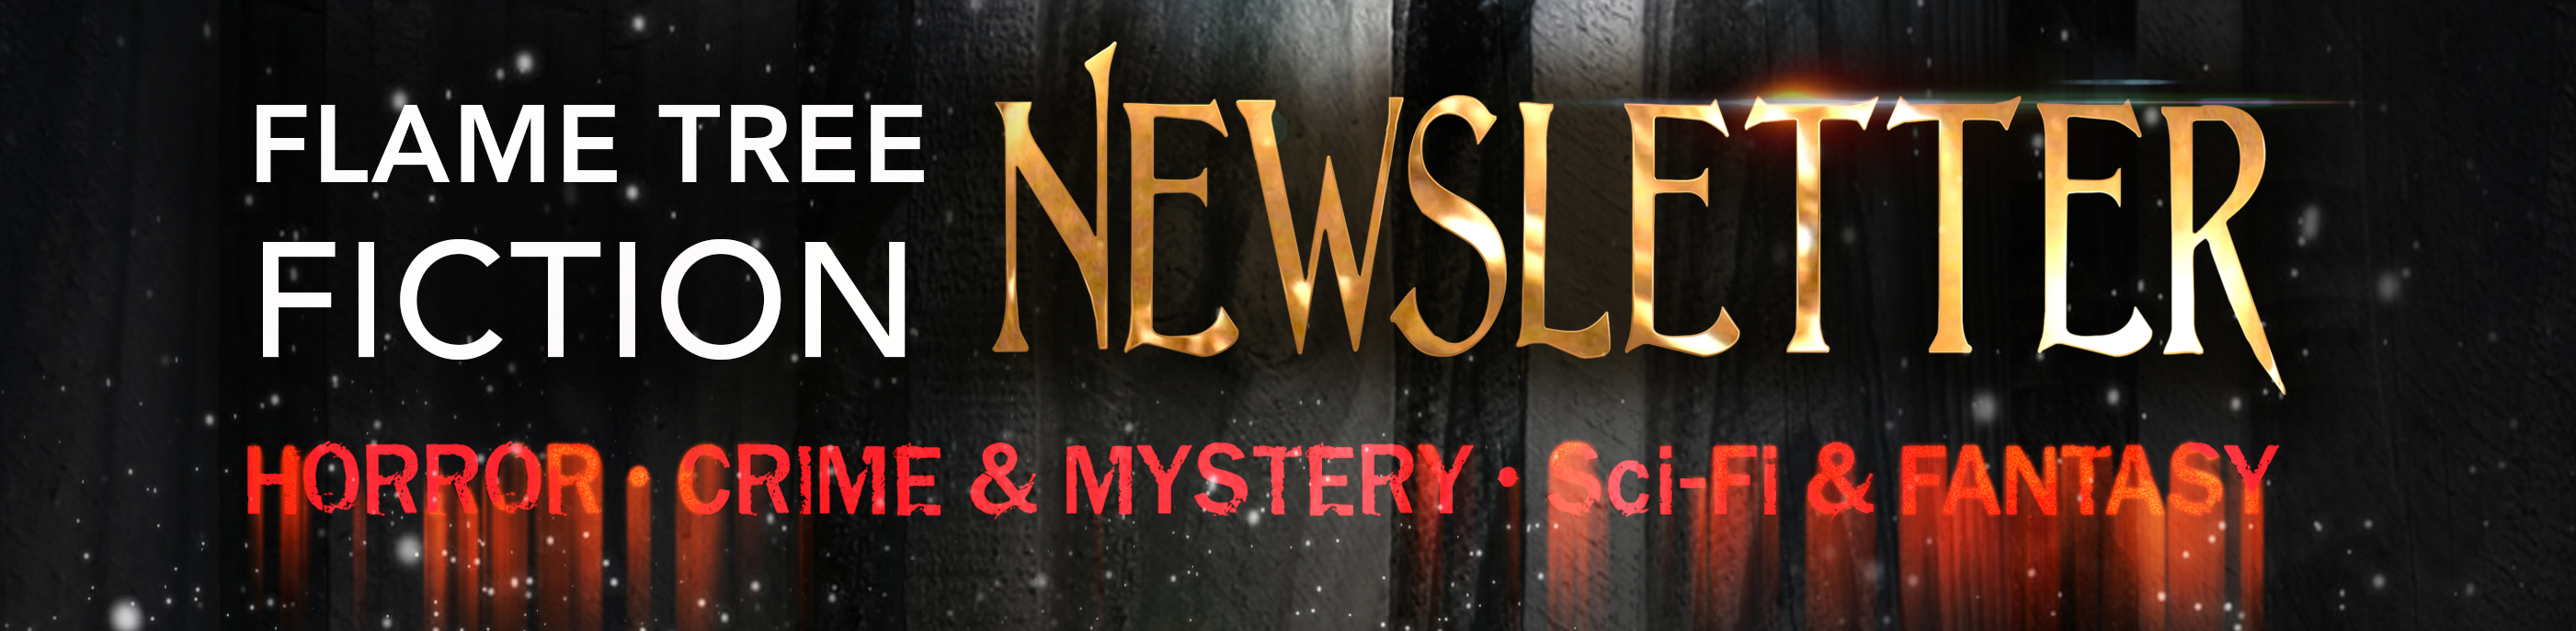 Flame Tree Fiction Newsletter